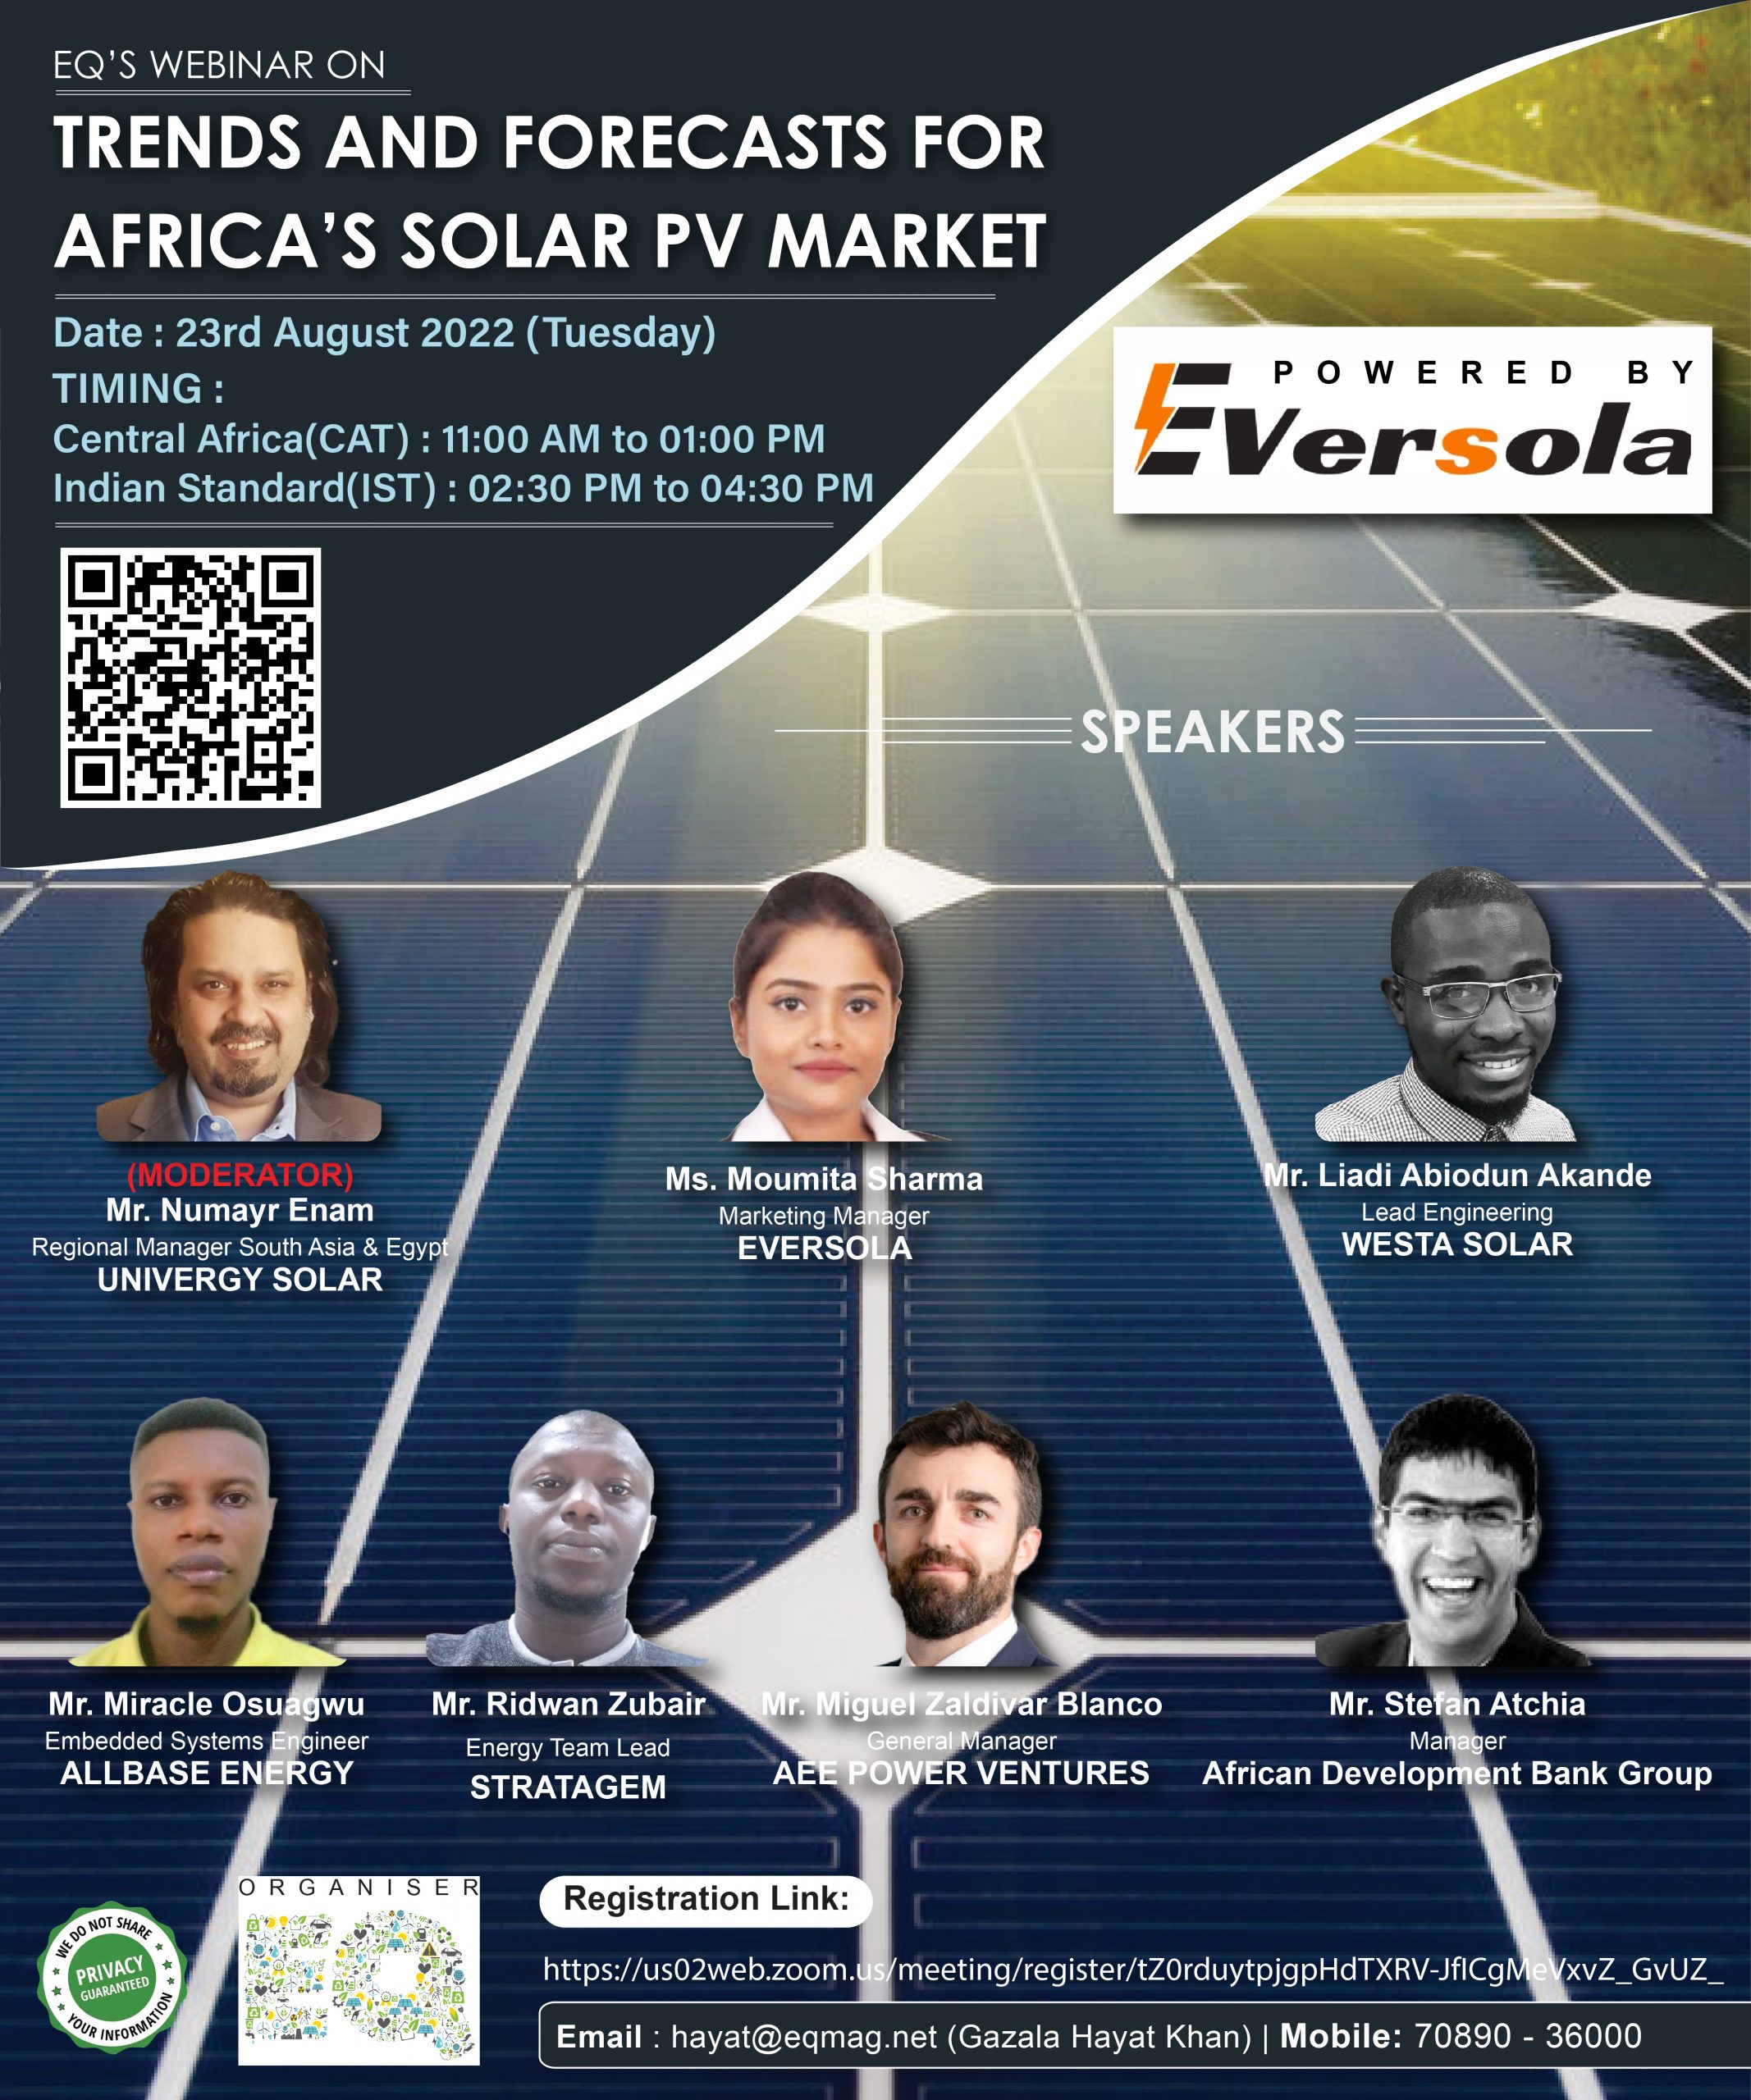 EQ Webinar on Africa Solar Market – Trends & Forecast Powered by EVERSOLA 23rd August 2022 (Tuesday) 2:30 PM Onwards….Register Now!